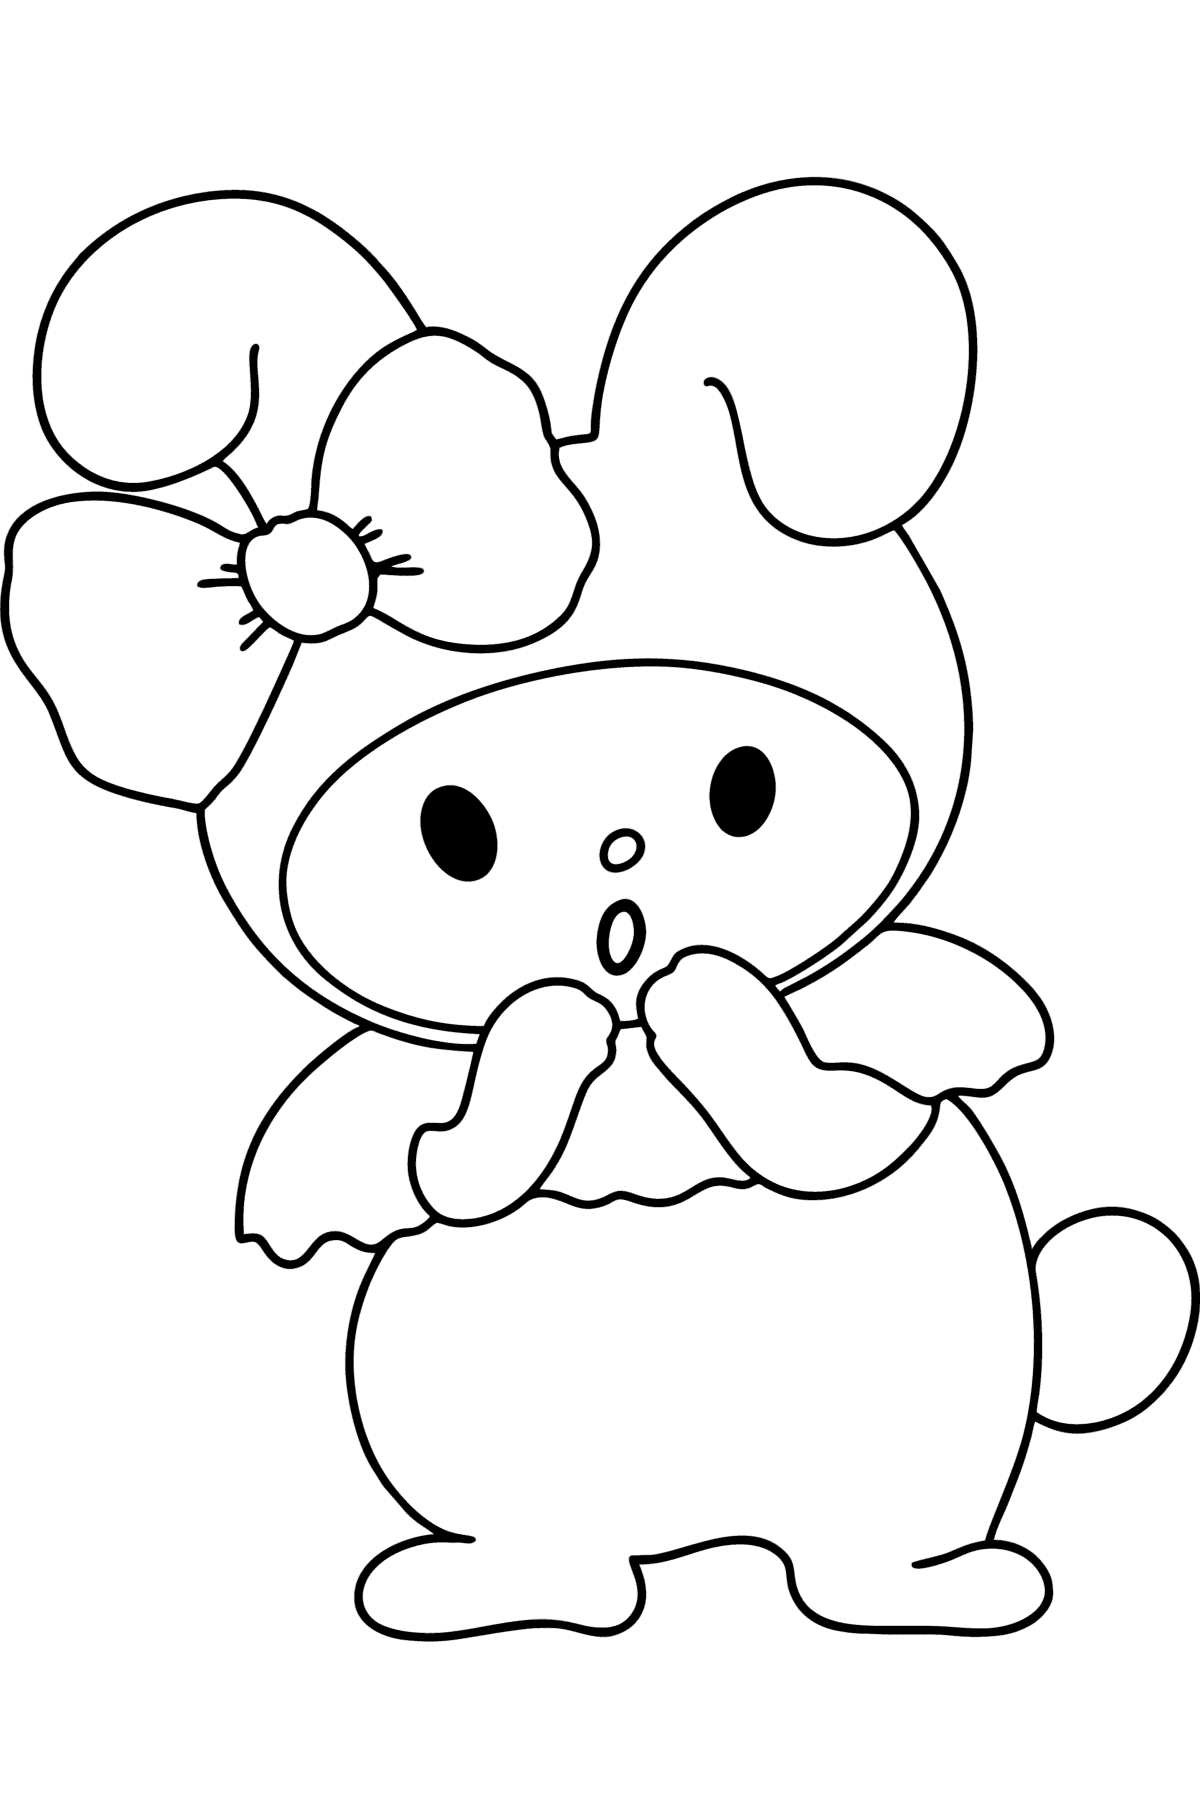 Hello Kitty My Melody coloring page - Coloring Pages for Kids